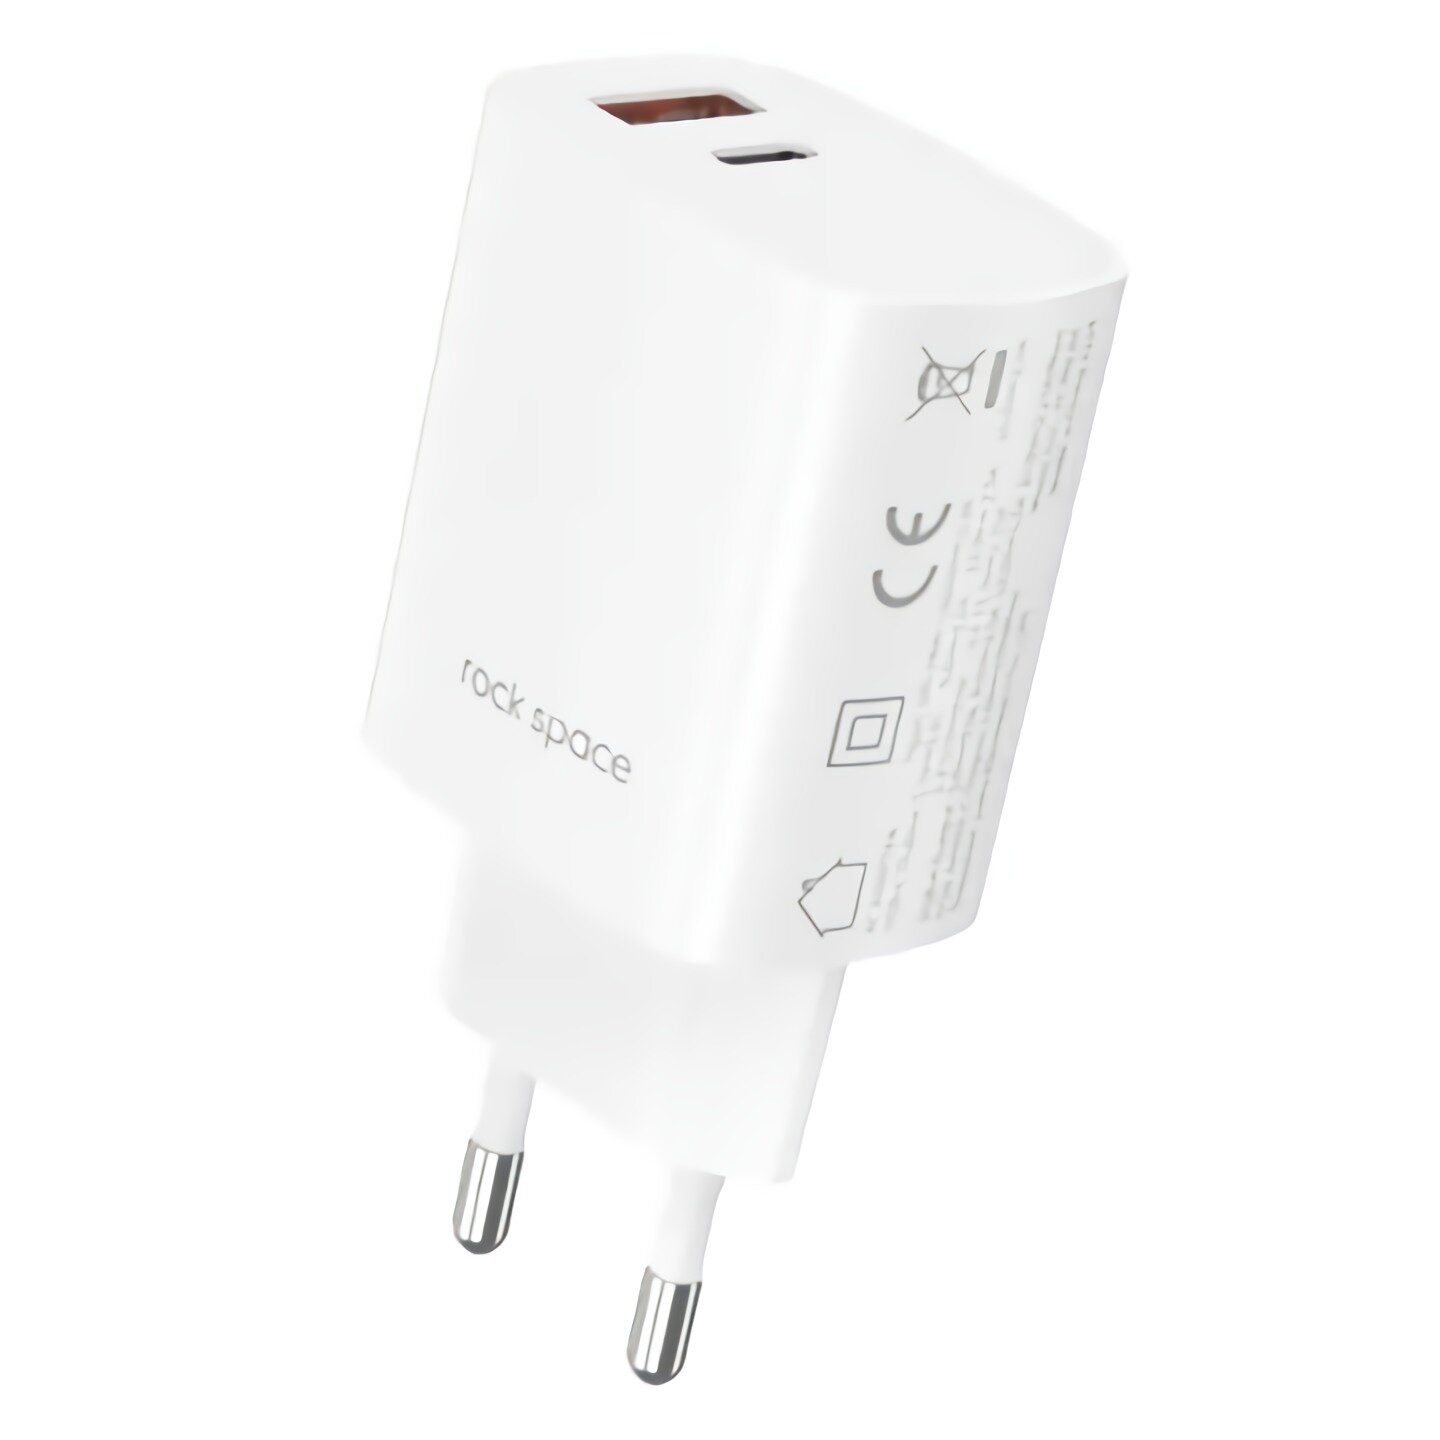 

ROCK 2-Ports 30W USB PD Charger USB-C PD3.0 QC3.0 AFC FCP PPS Fast Charging Wall Charger Adapter EU Plug For iPhone 13 P